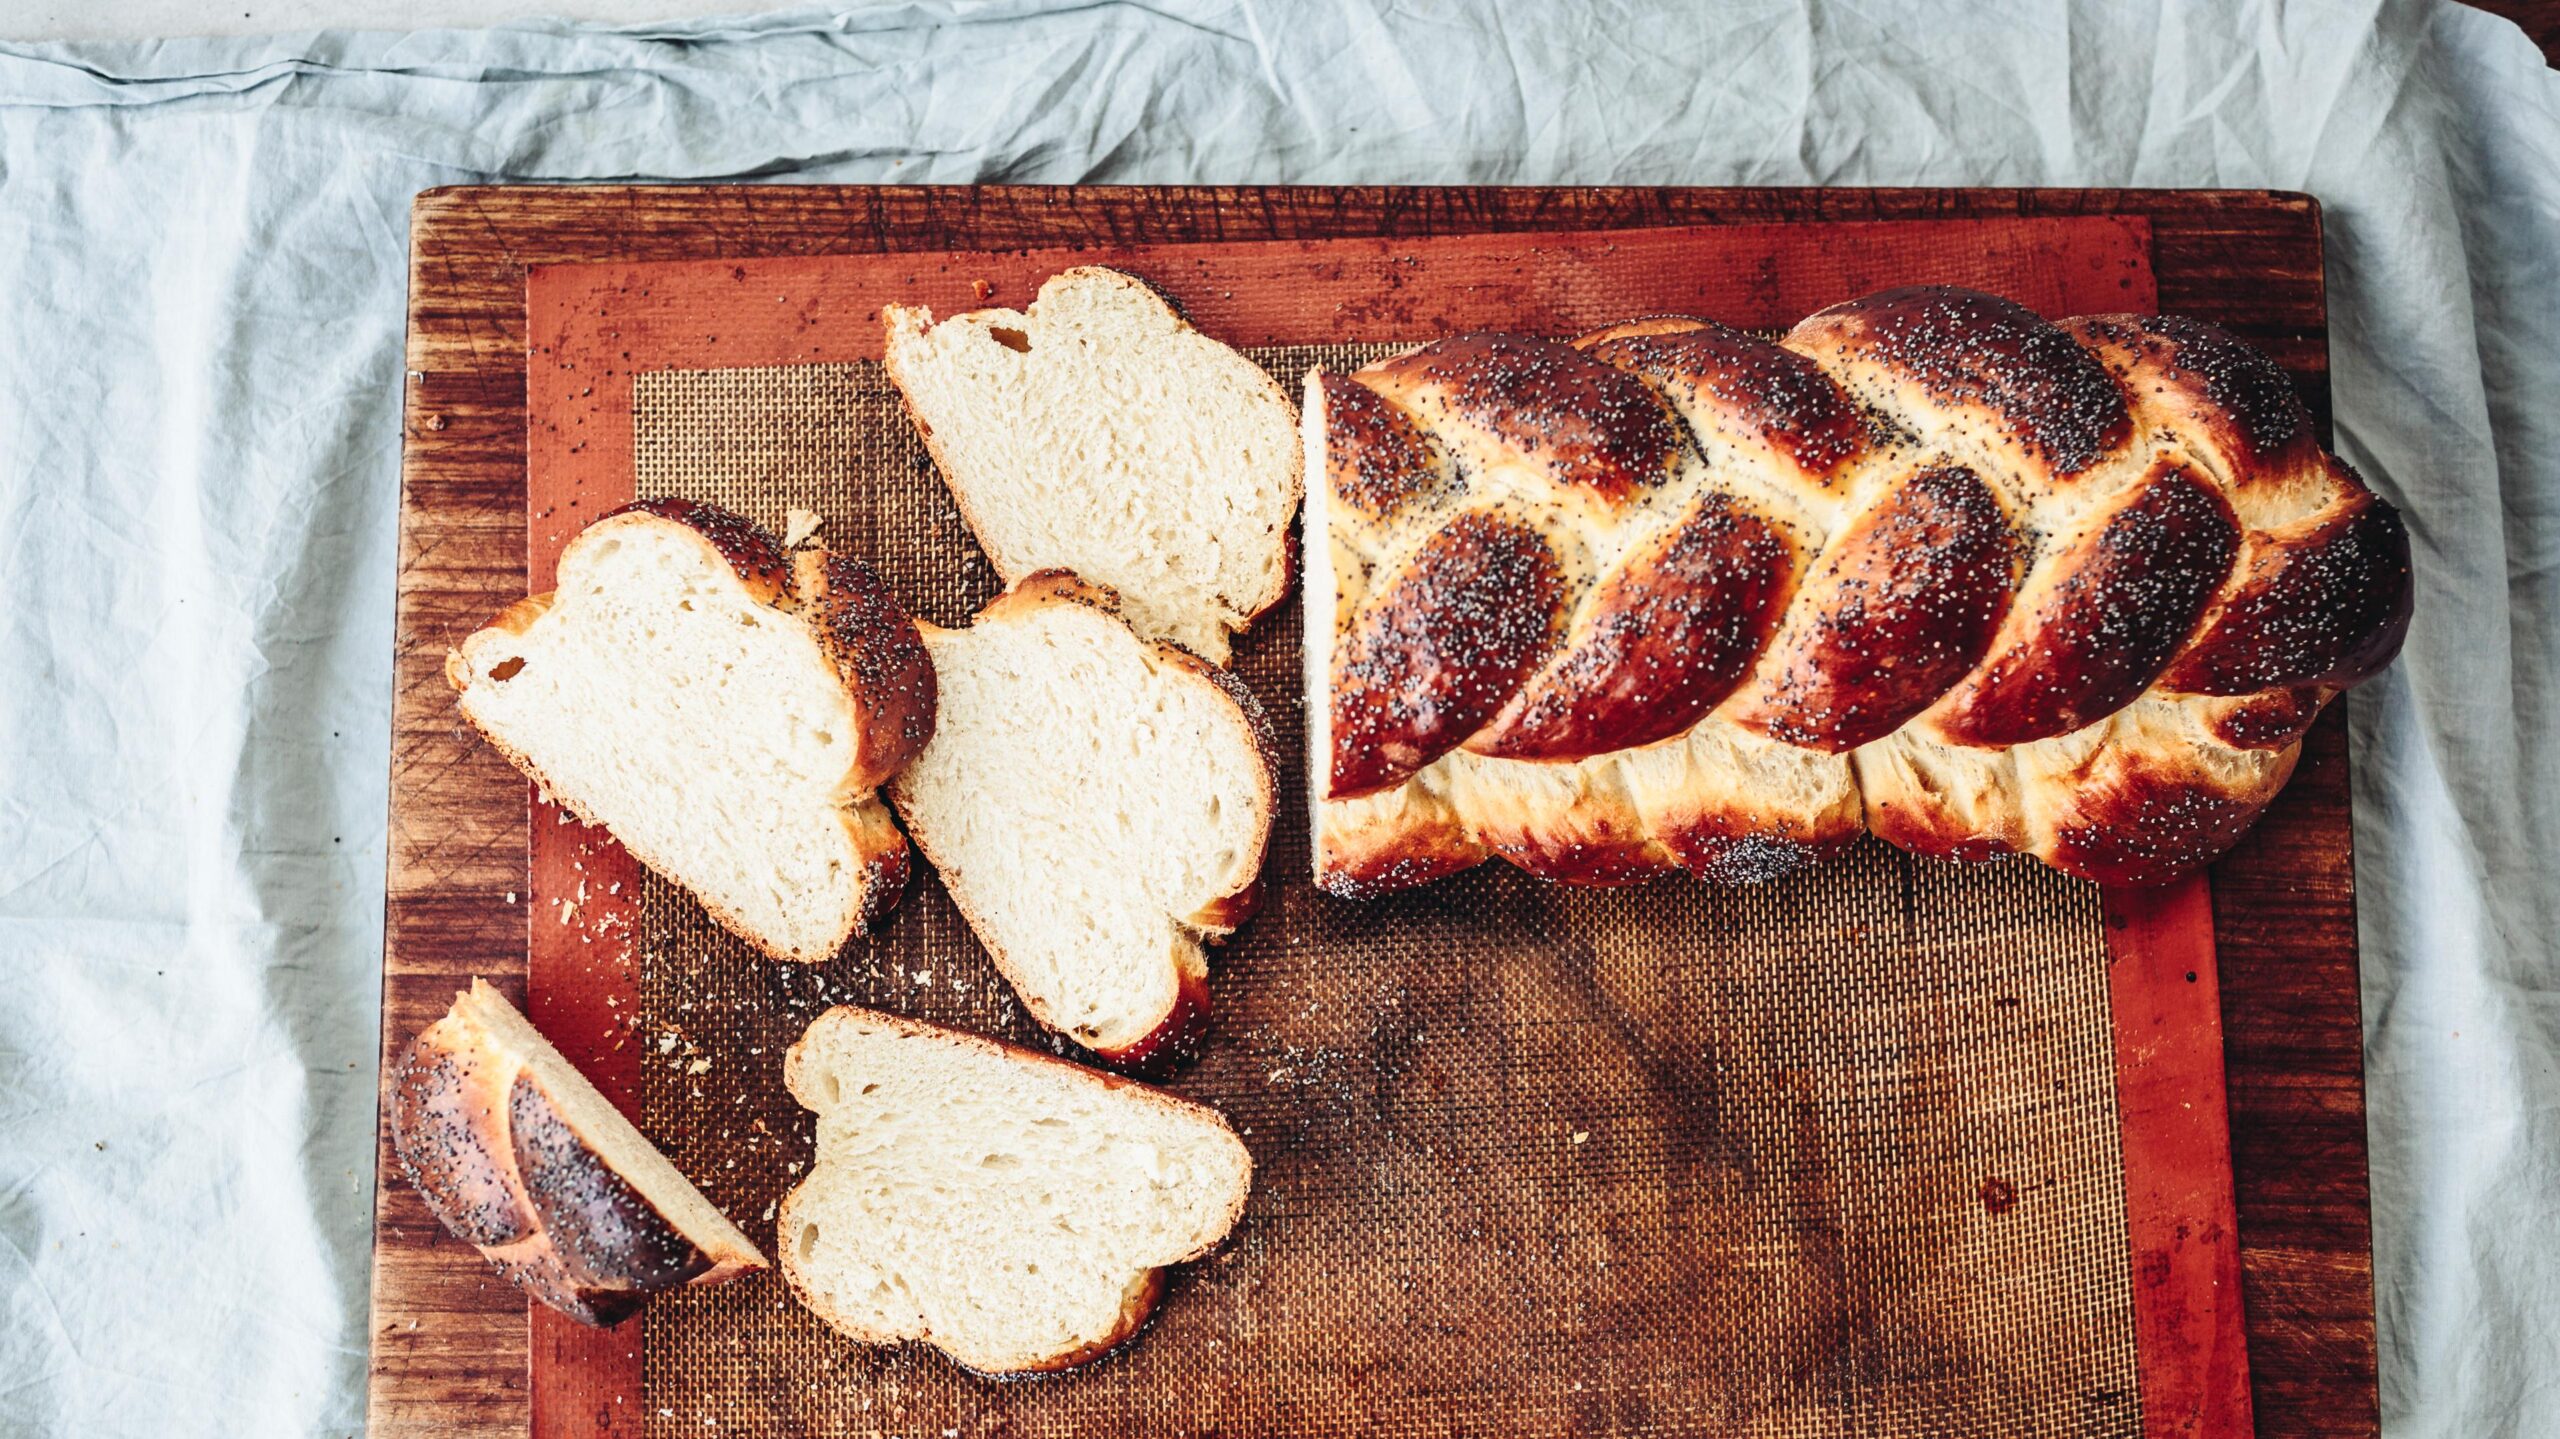  Get ready to fall in love with this fluffy and delicious bread